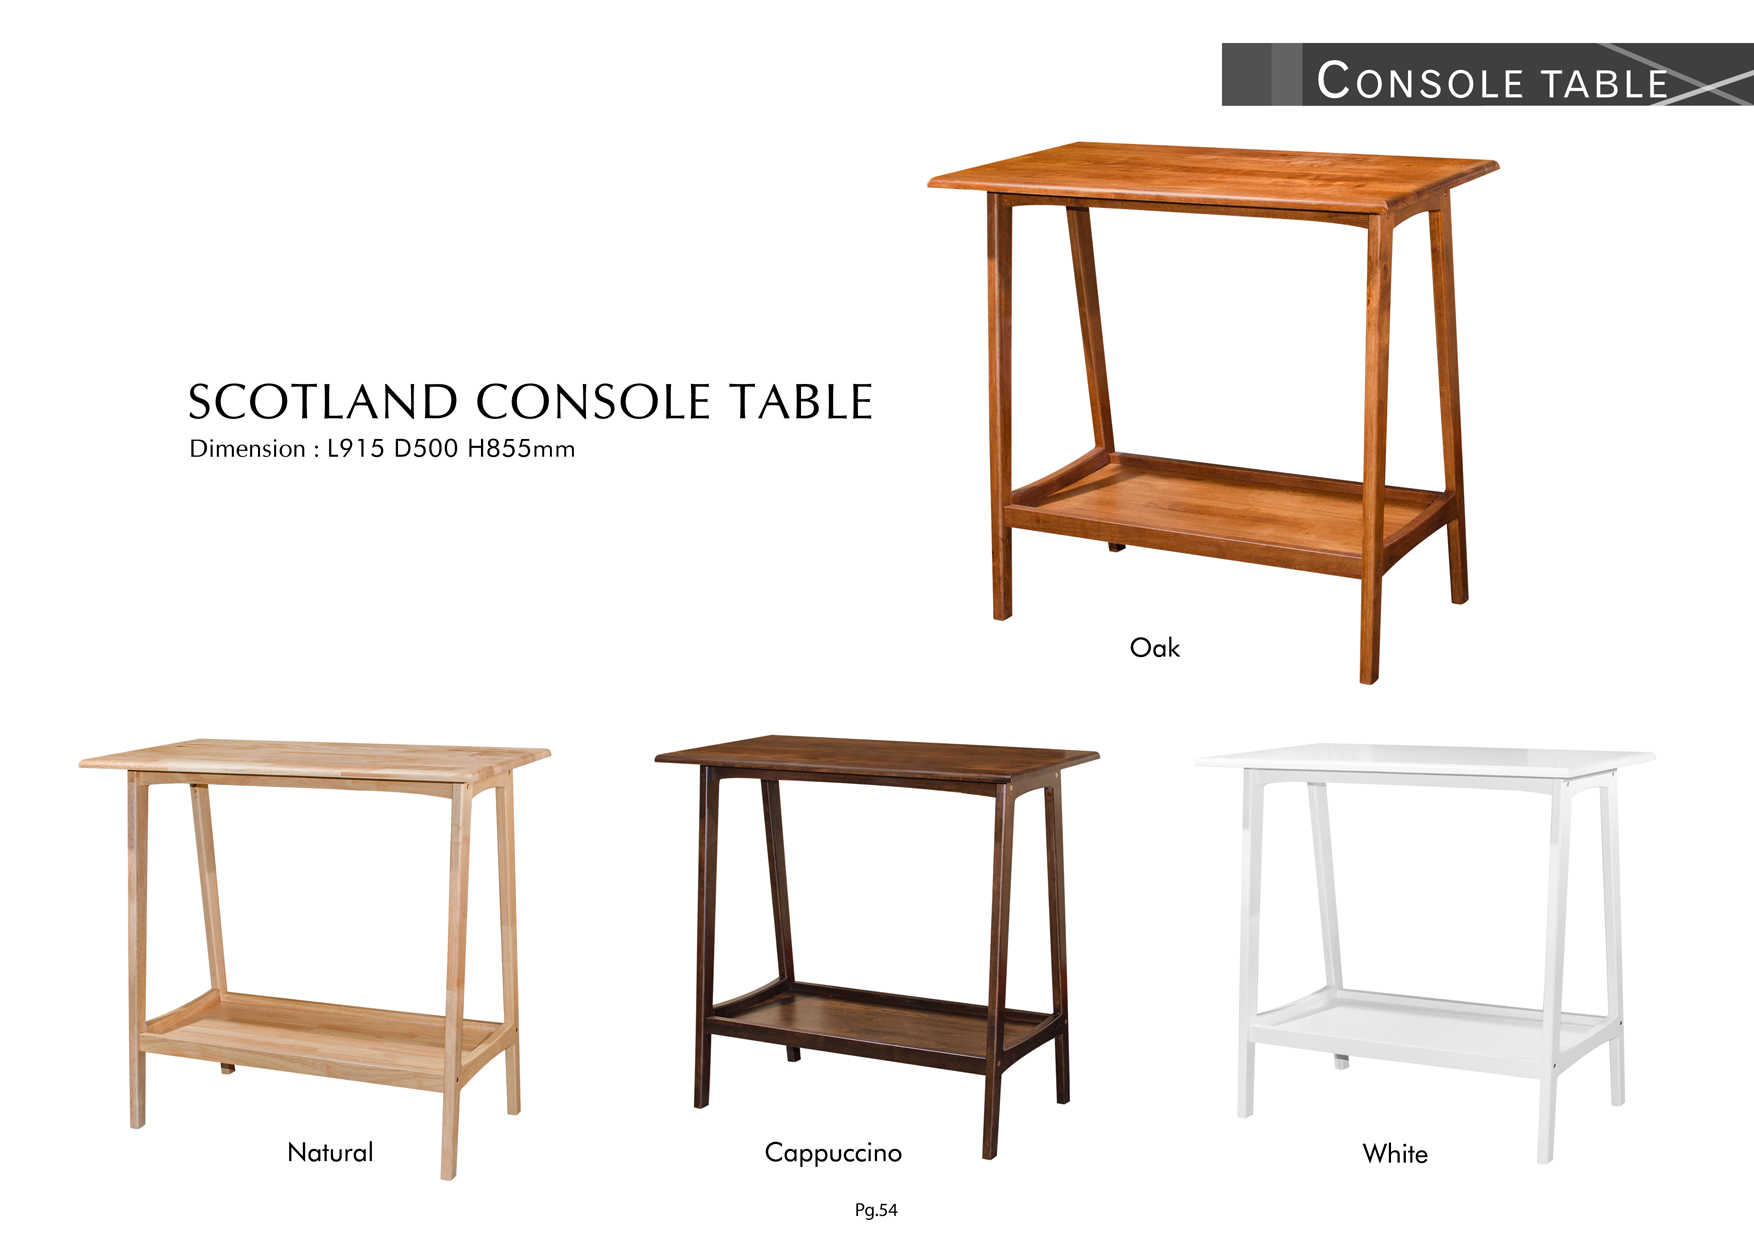 Product: PG54. SCOTLAND CONSOLE TABLE